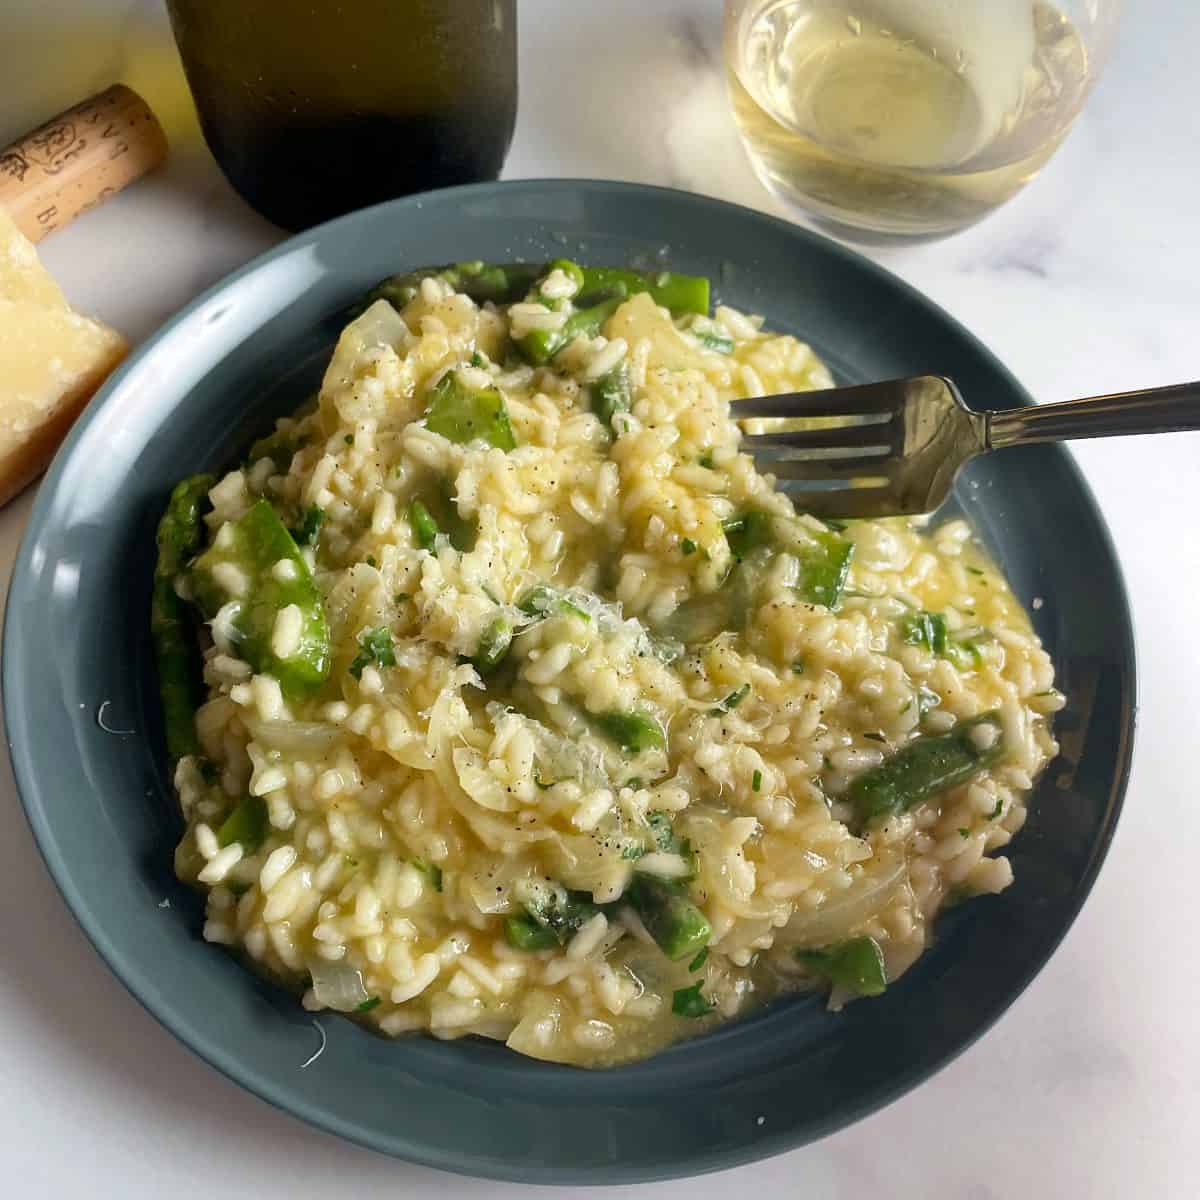 a fork scooping a bite of pea and asparagus risotto.